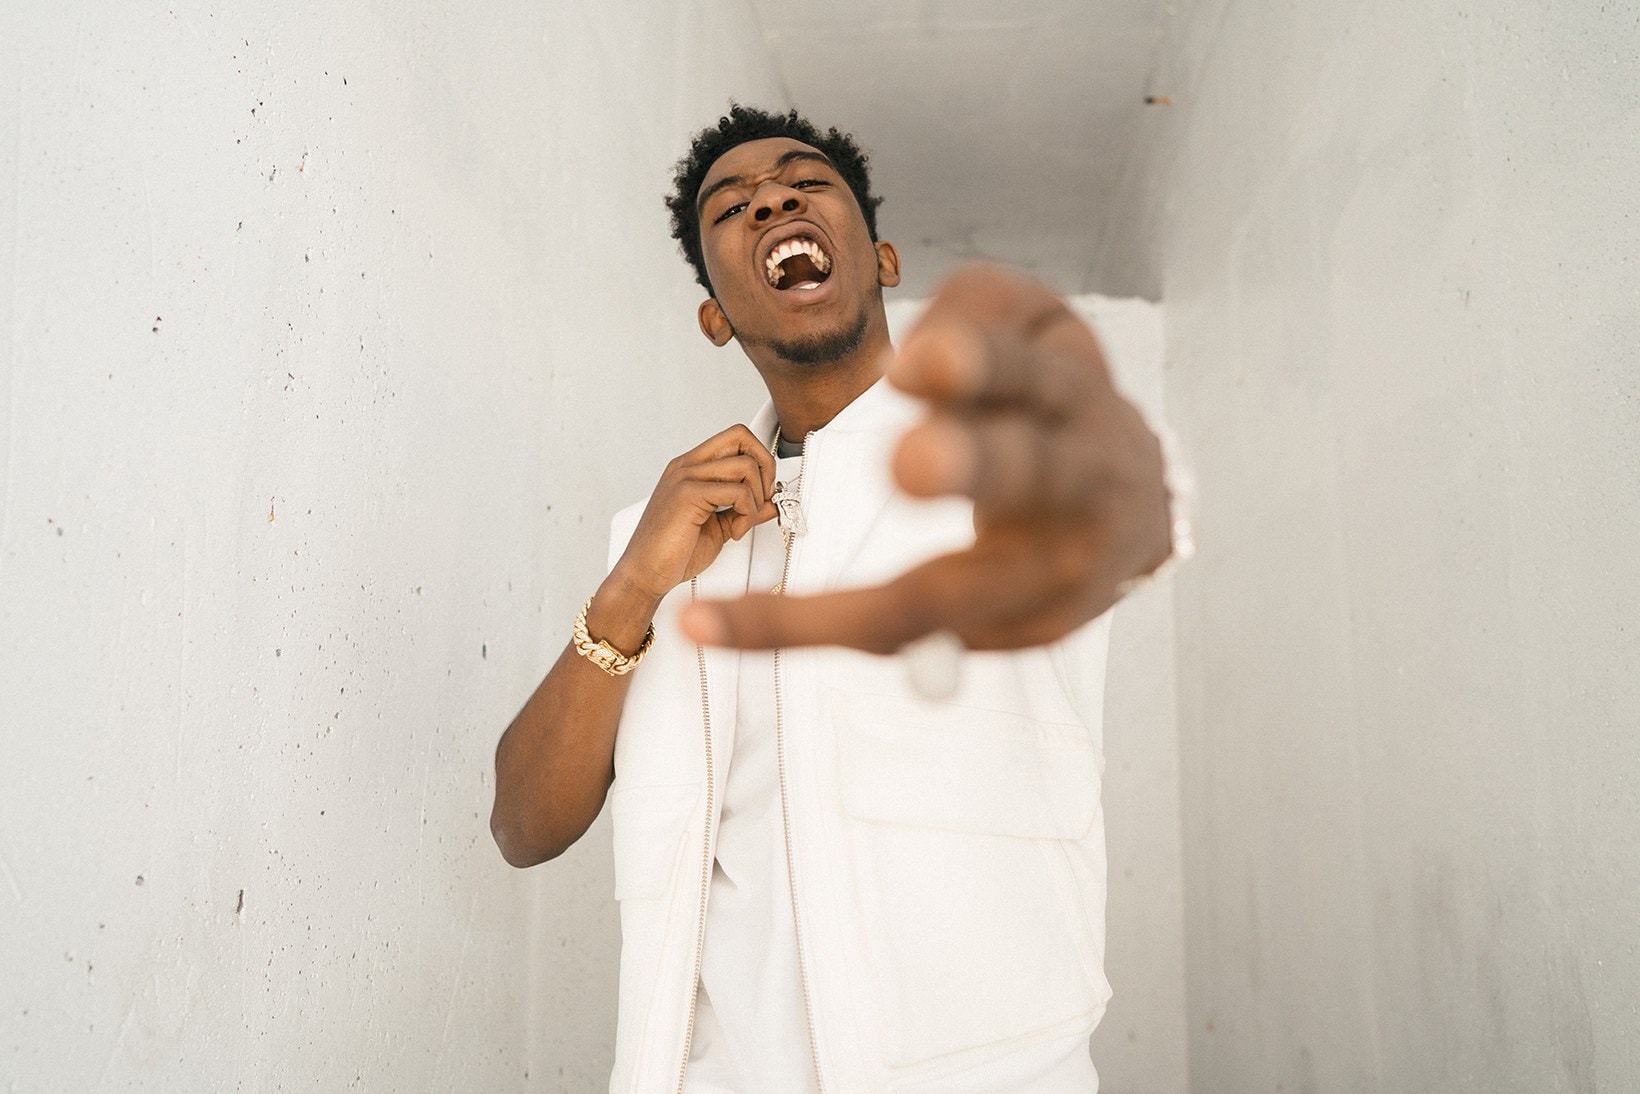 G.O.O.D Music Desiigner Arrested for Possession of Weapons & Drugs